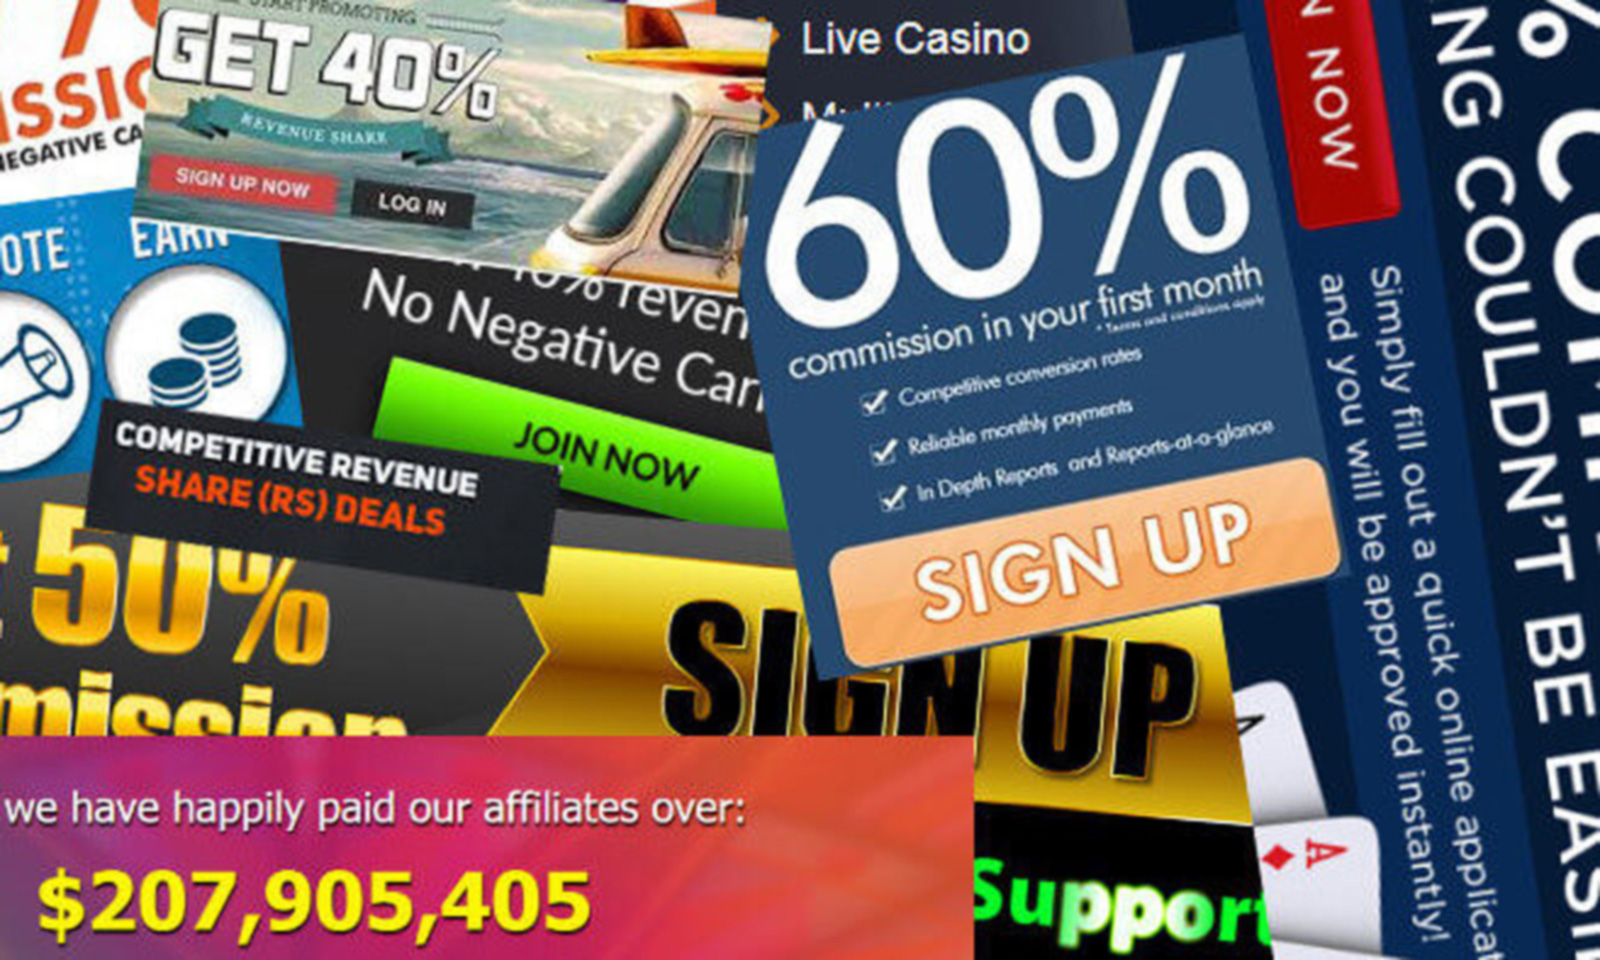 Win at roulette - online casino promotion affiliation